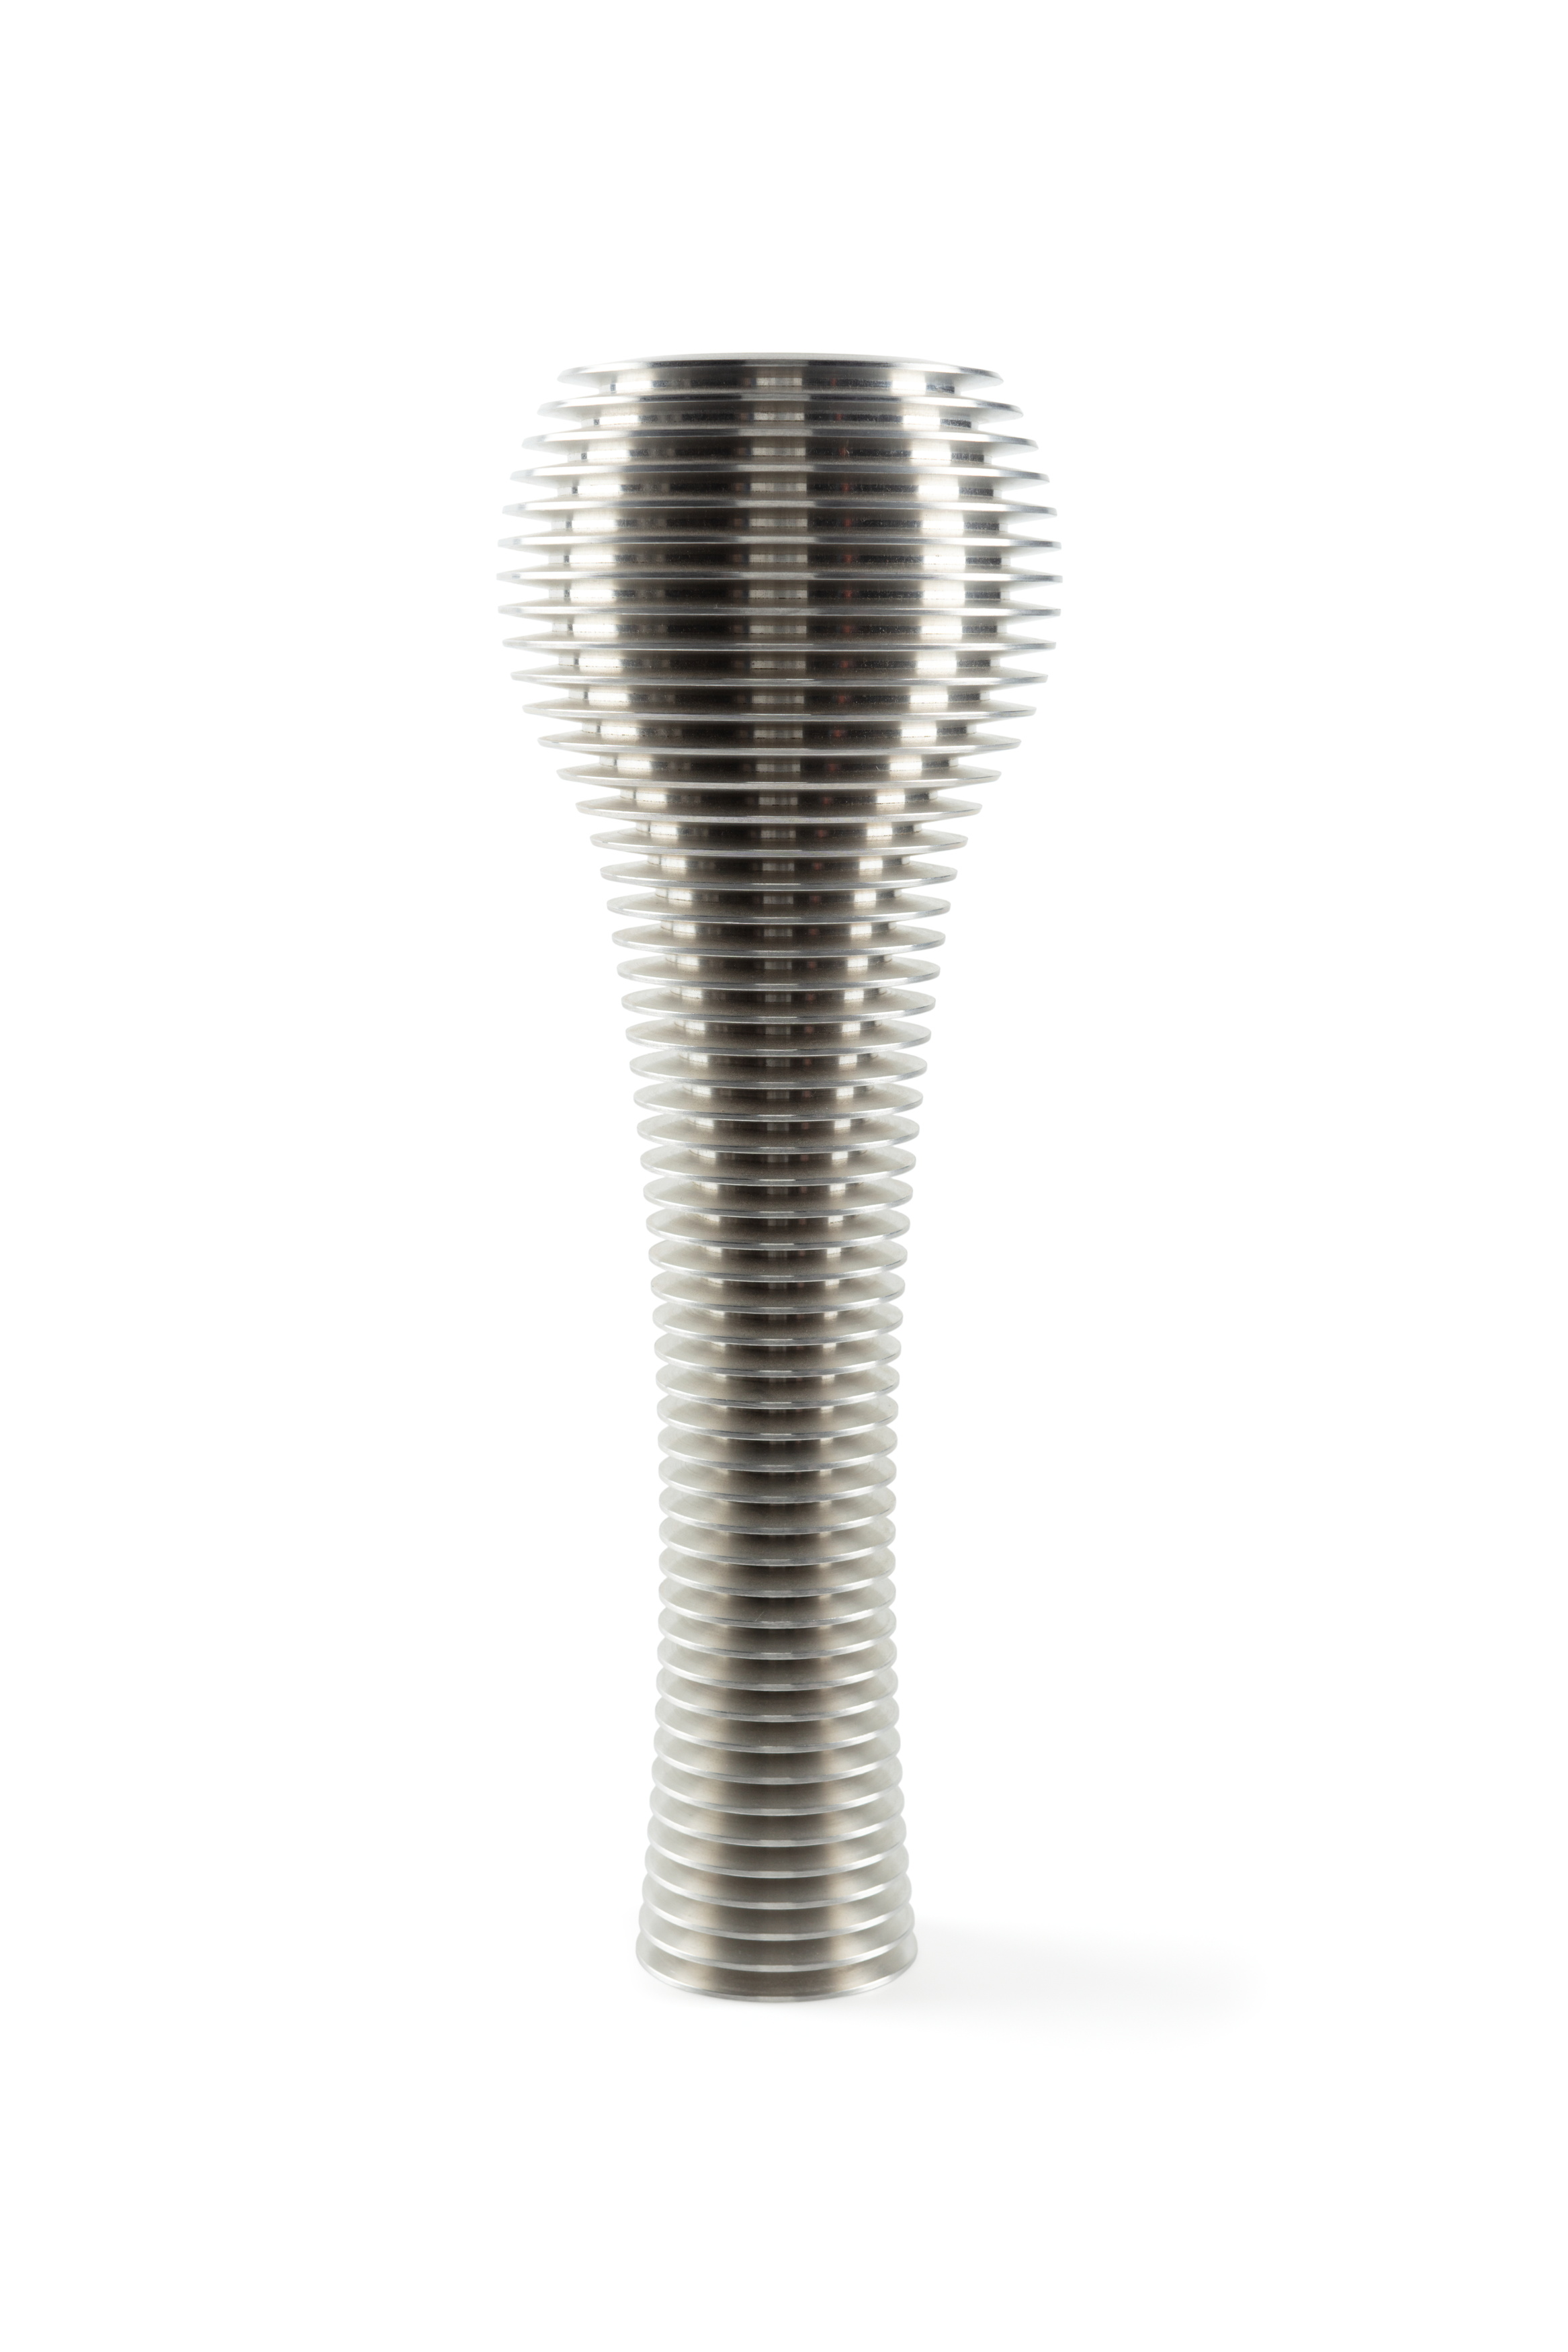 Powerhouse Collection - 'A 51' vase by Andrea Branzi